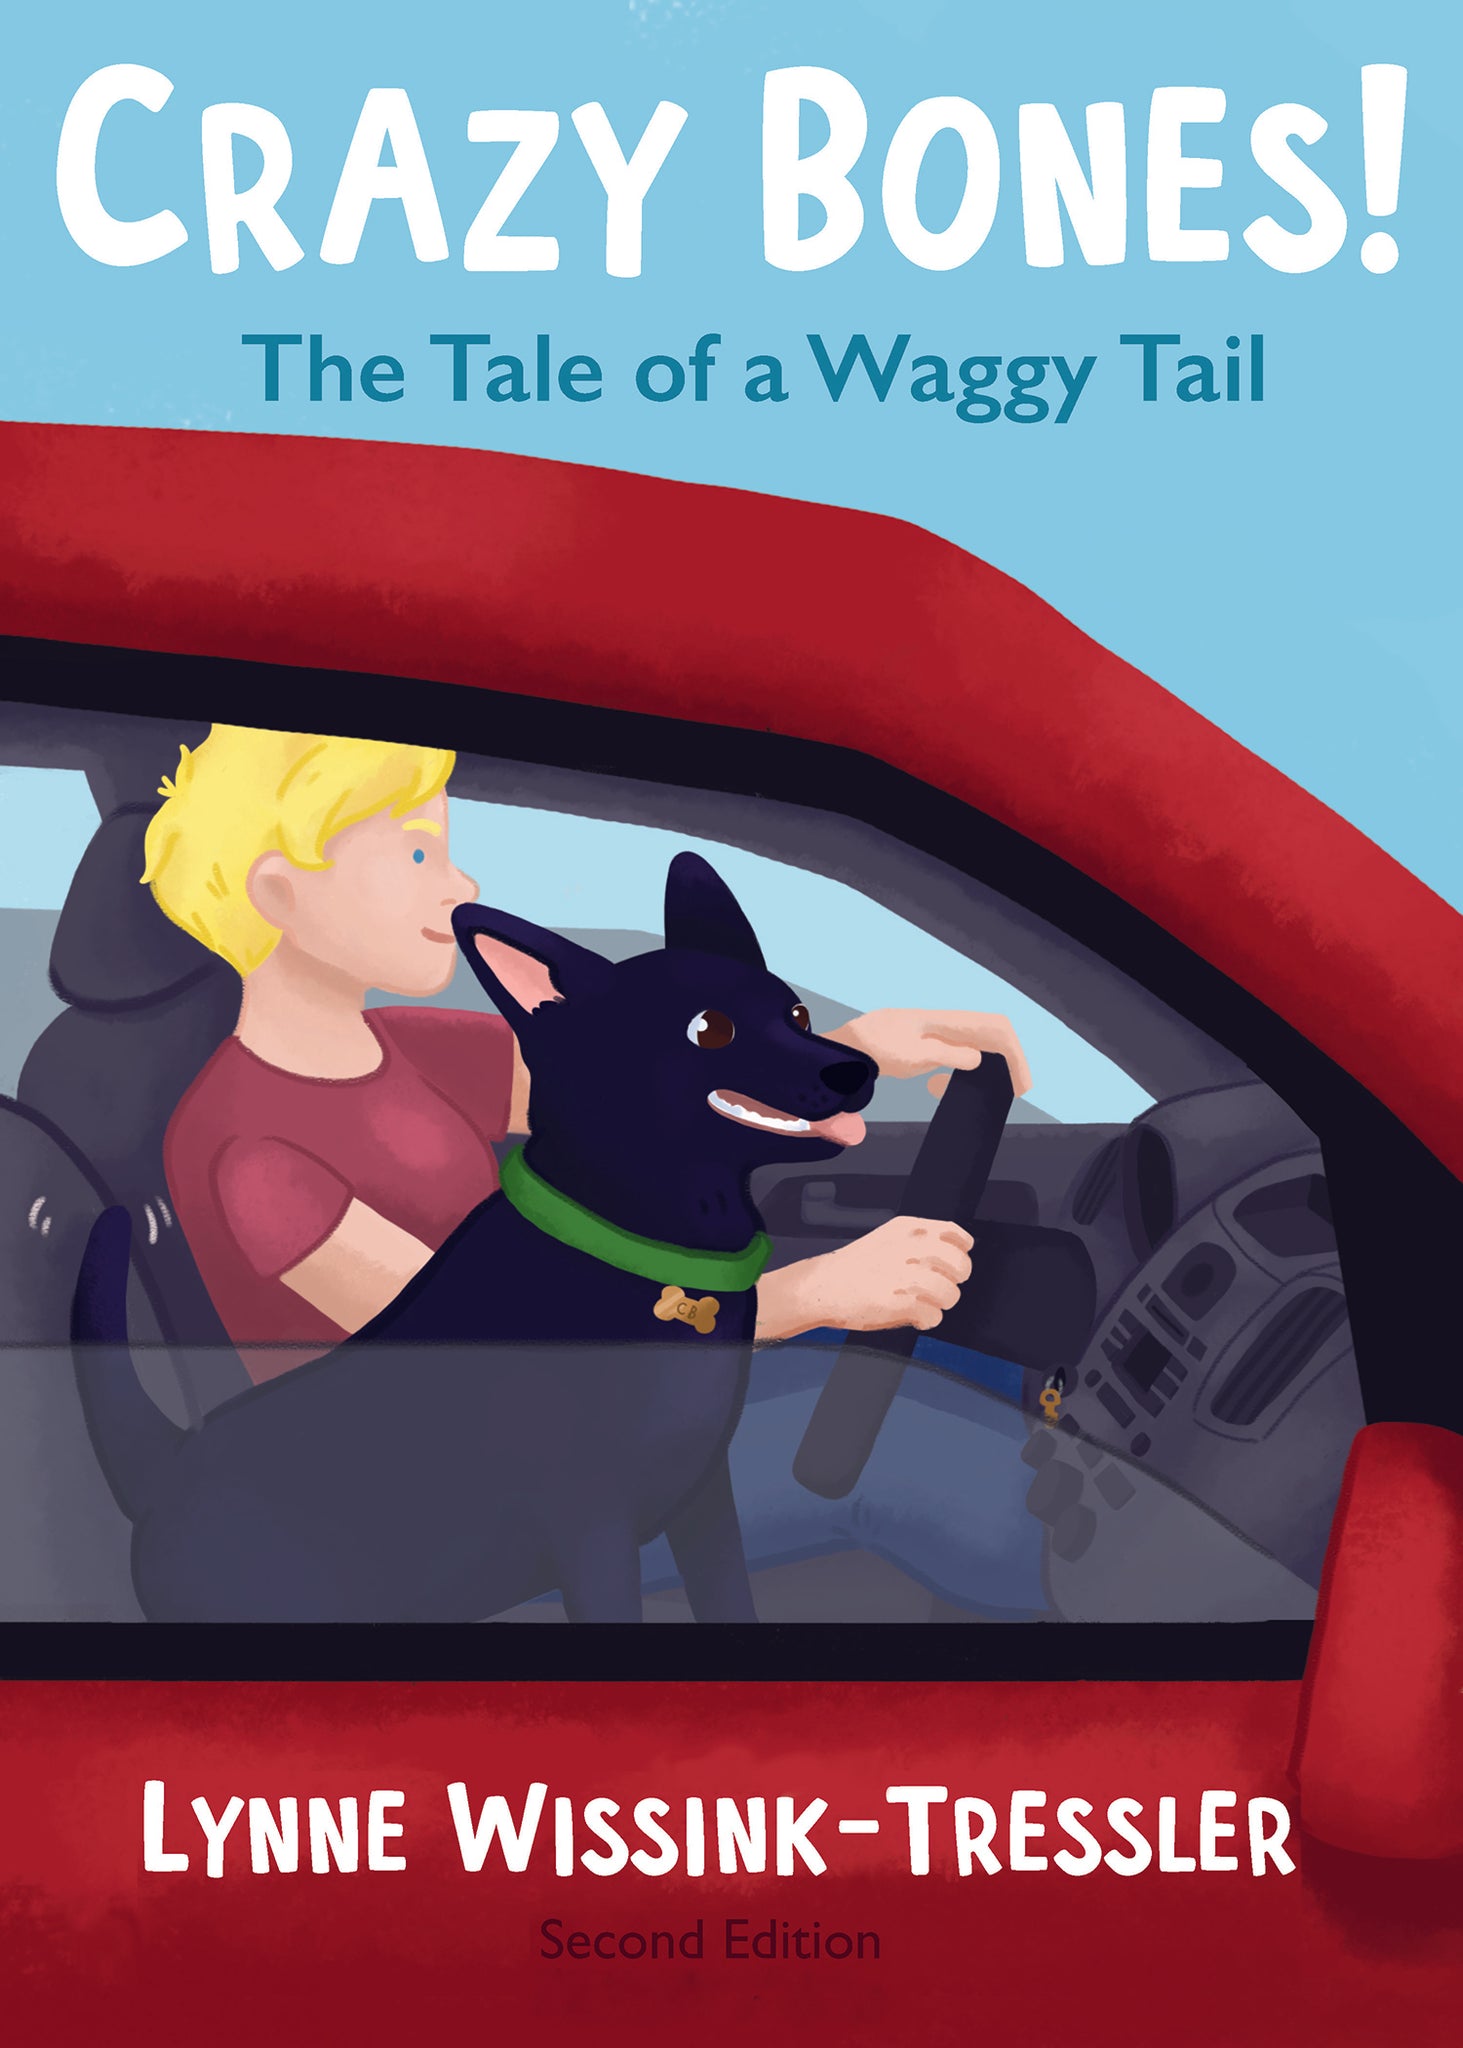 Crazy Bones: The Tale of a Waggy Tail by Lynne Wissink-Tressler